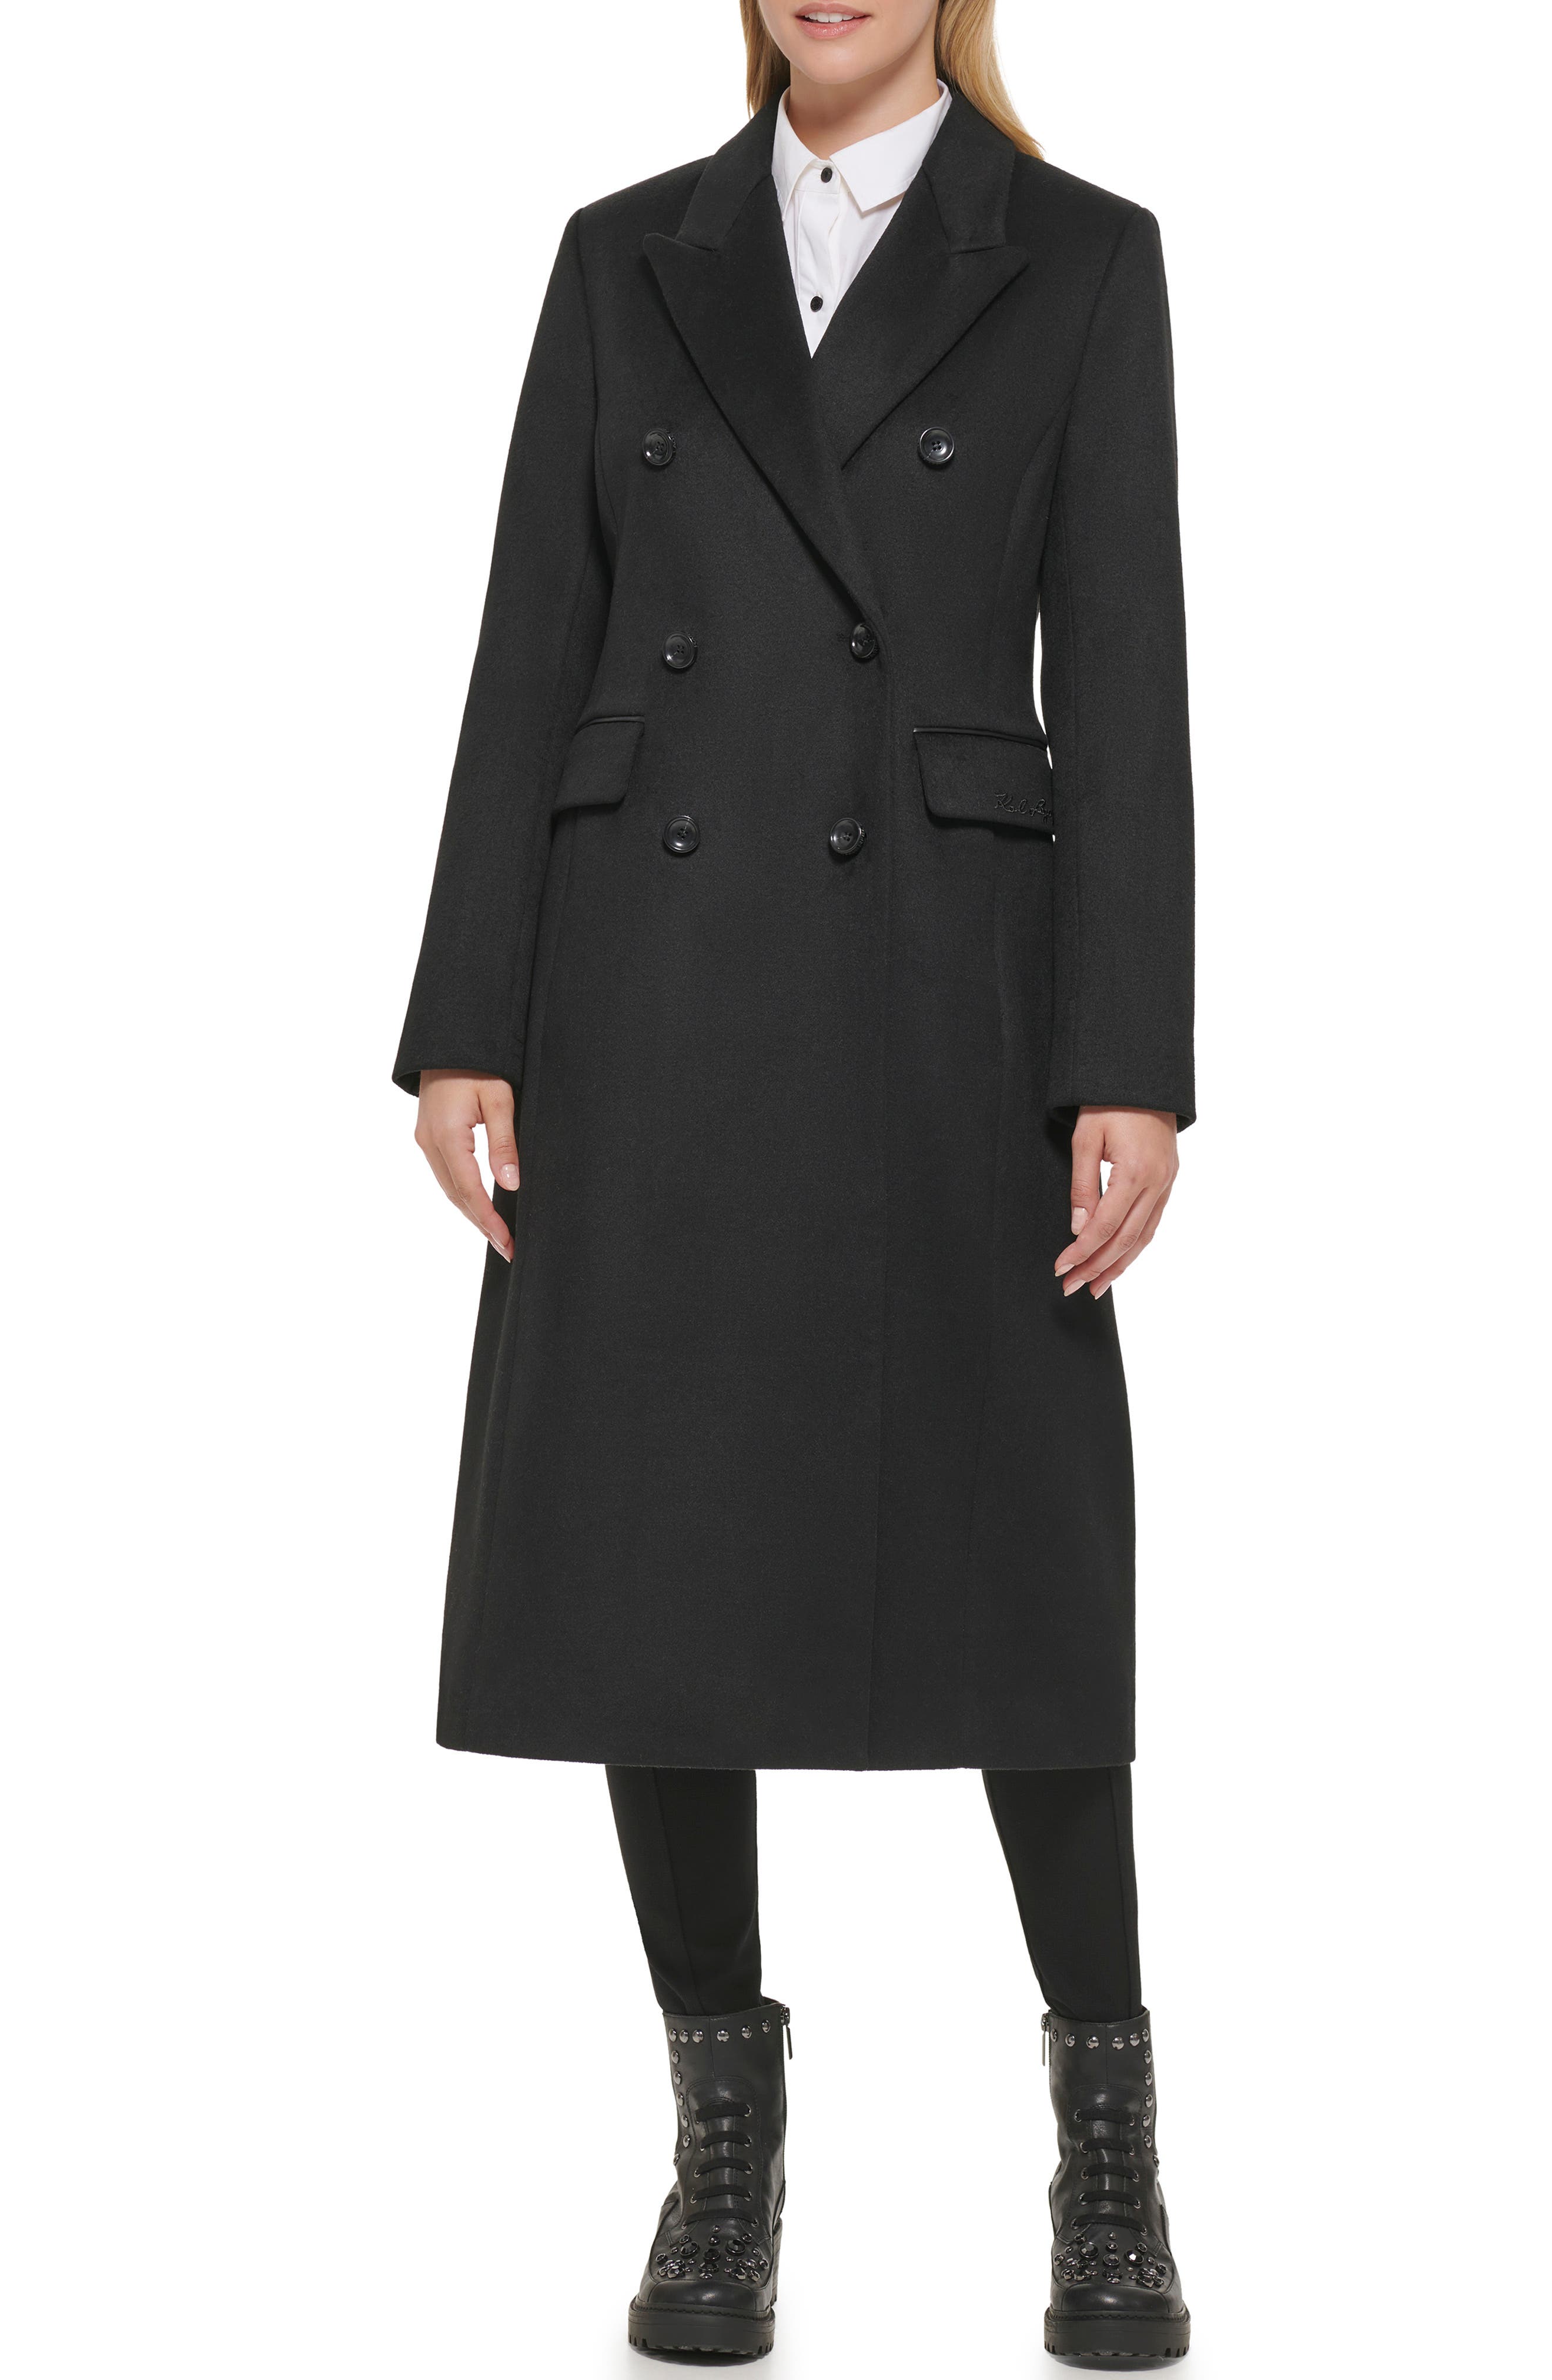 Women's Double Breasted Coats | Nordstrom